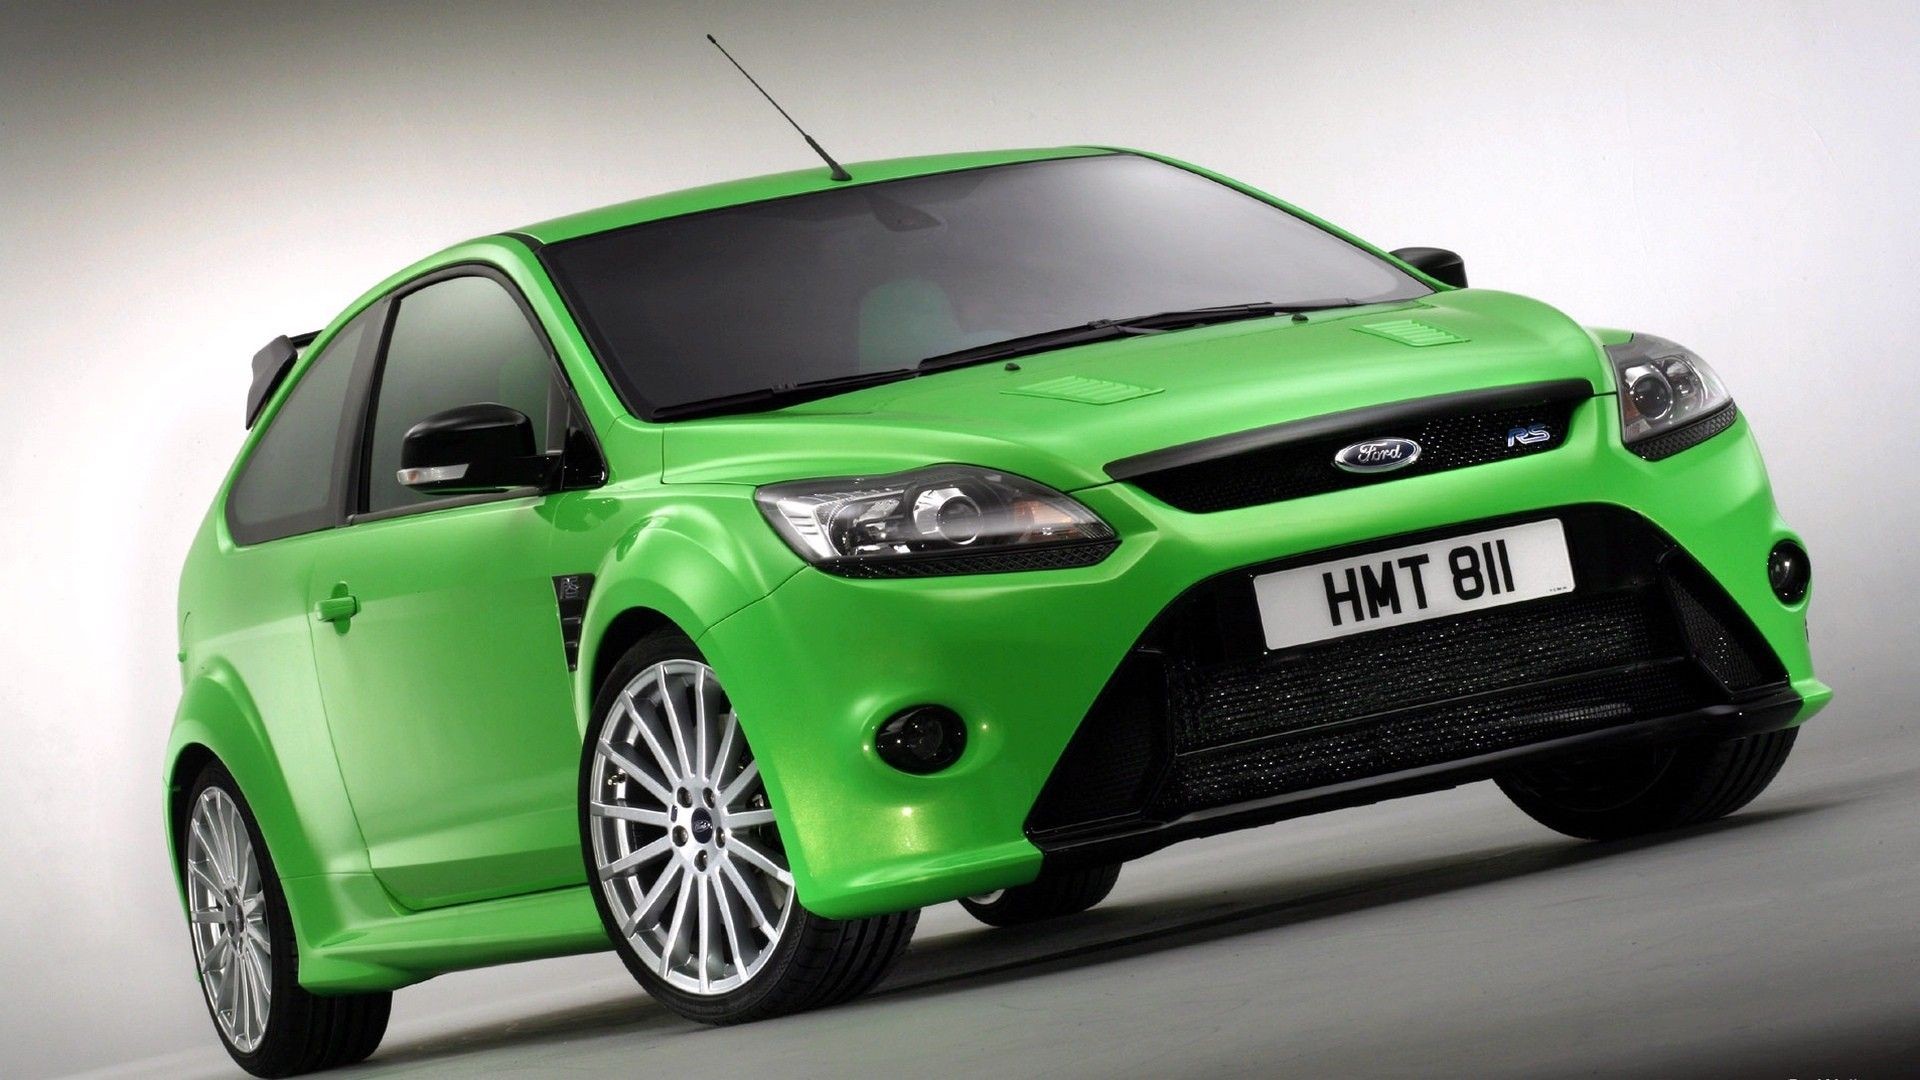 General 1920x1080 car Ford green cars Ford Focus RS vehicle simple background British cars hatchbacks hot hatch